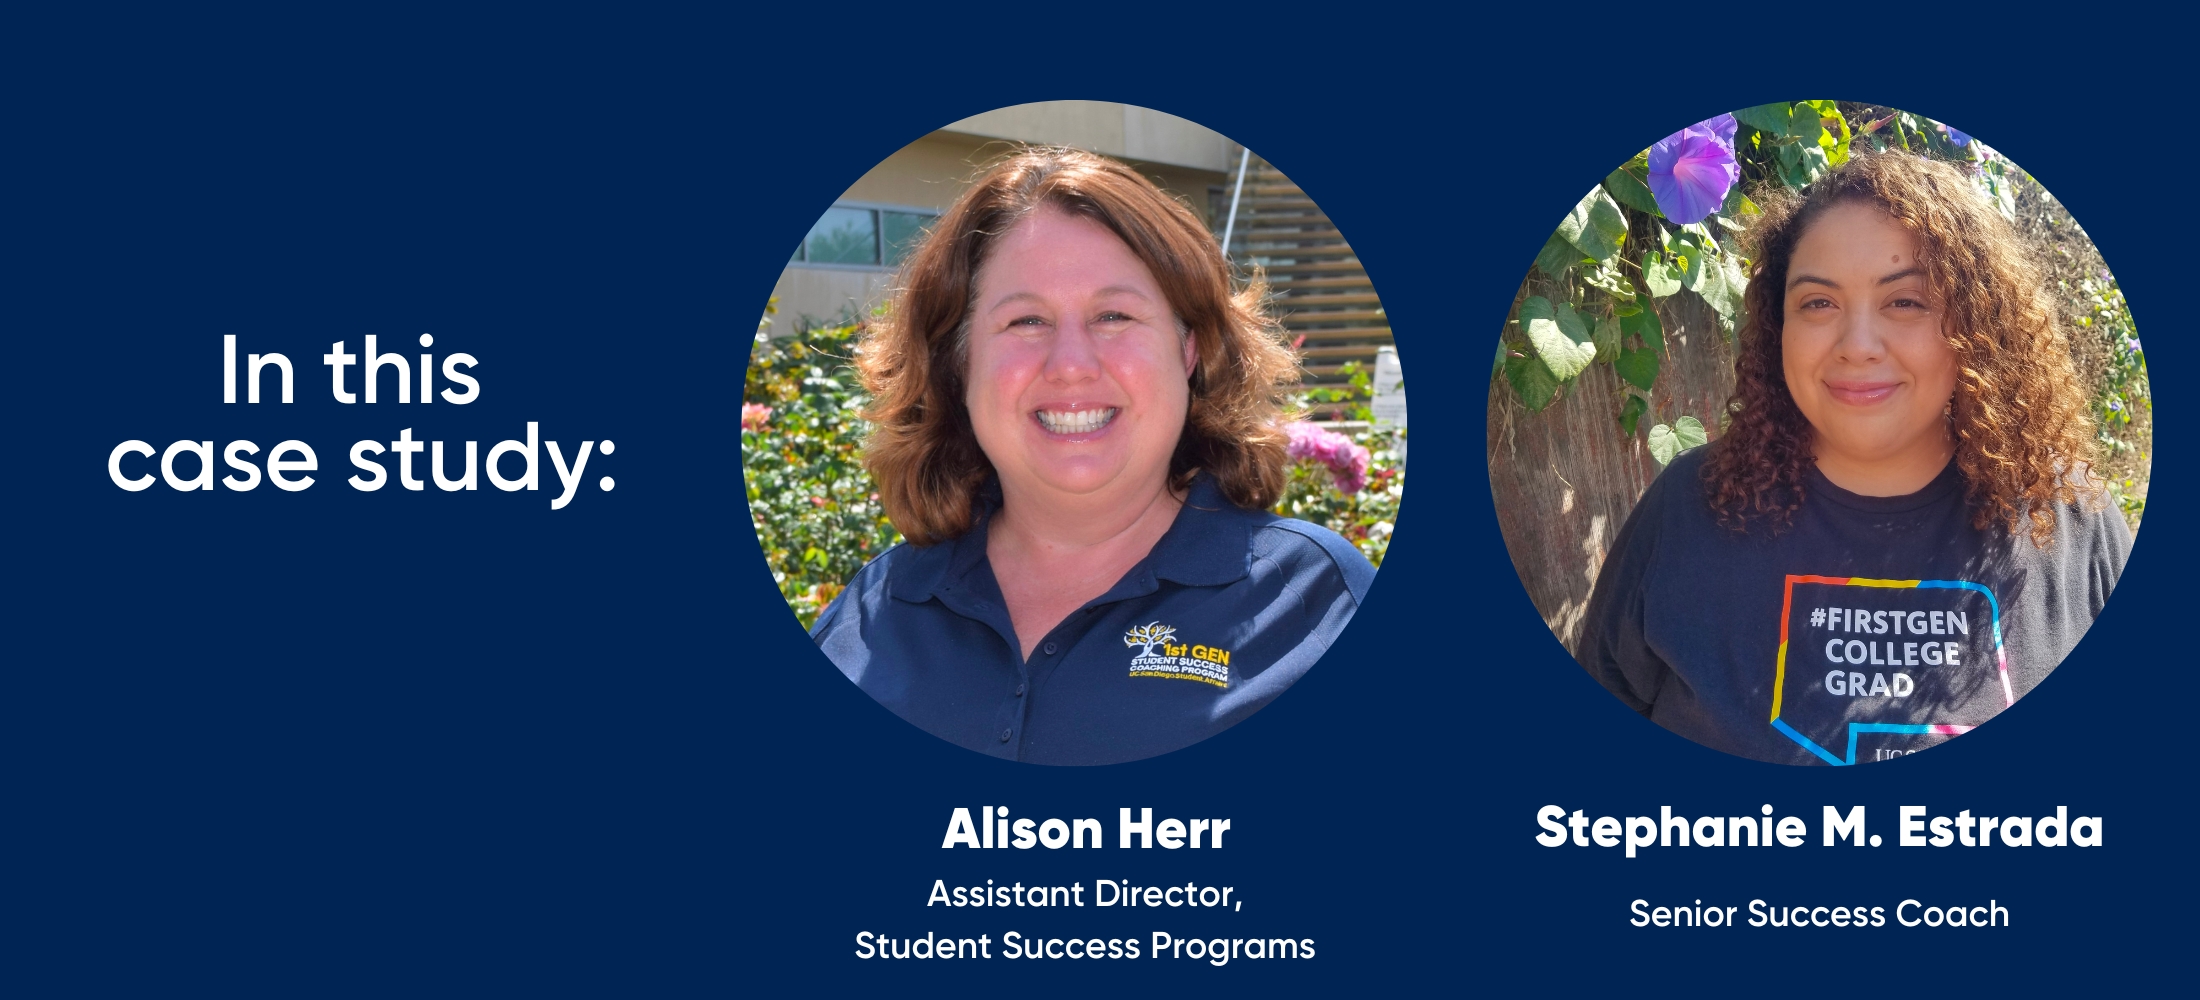 in this case study: Alison Herr - Assistant Director, Student Success Programs and Stephanie M. Estrada, Senior Success Coach 